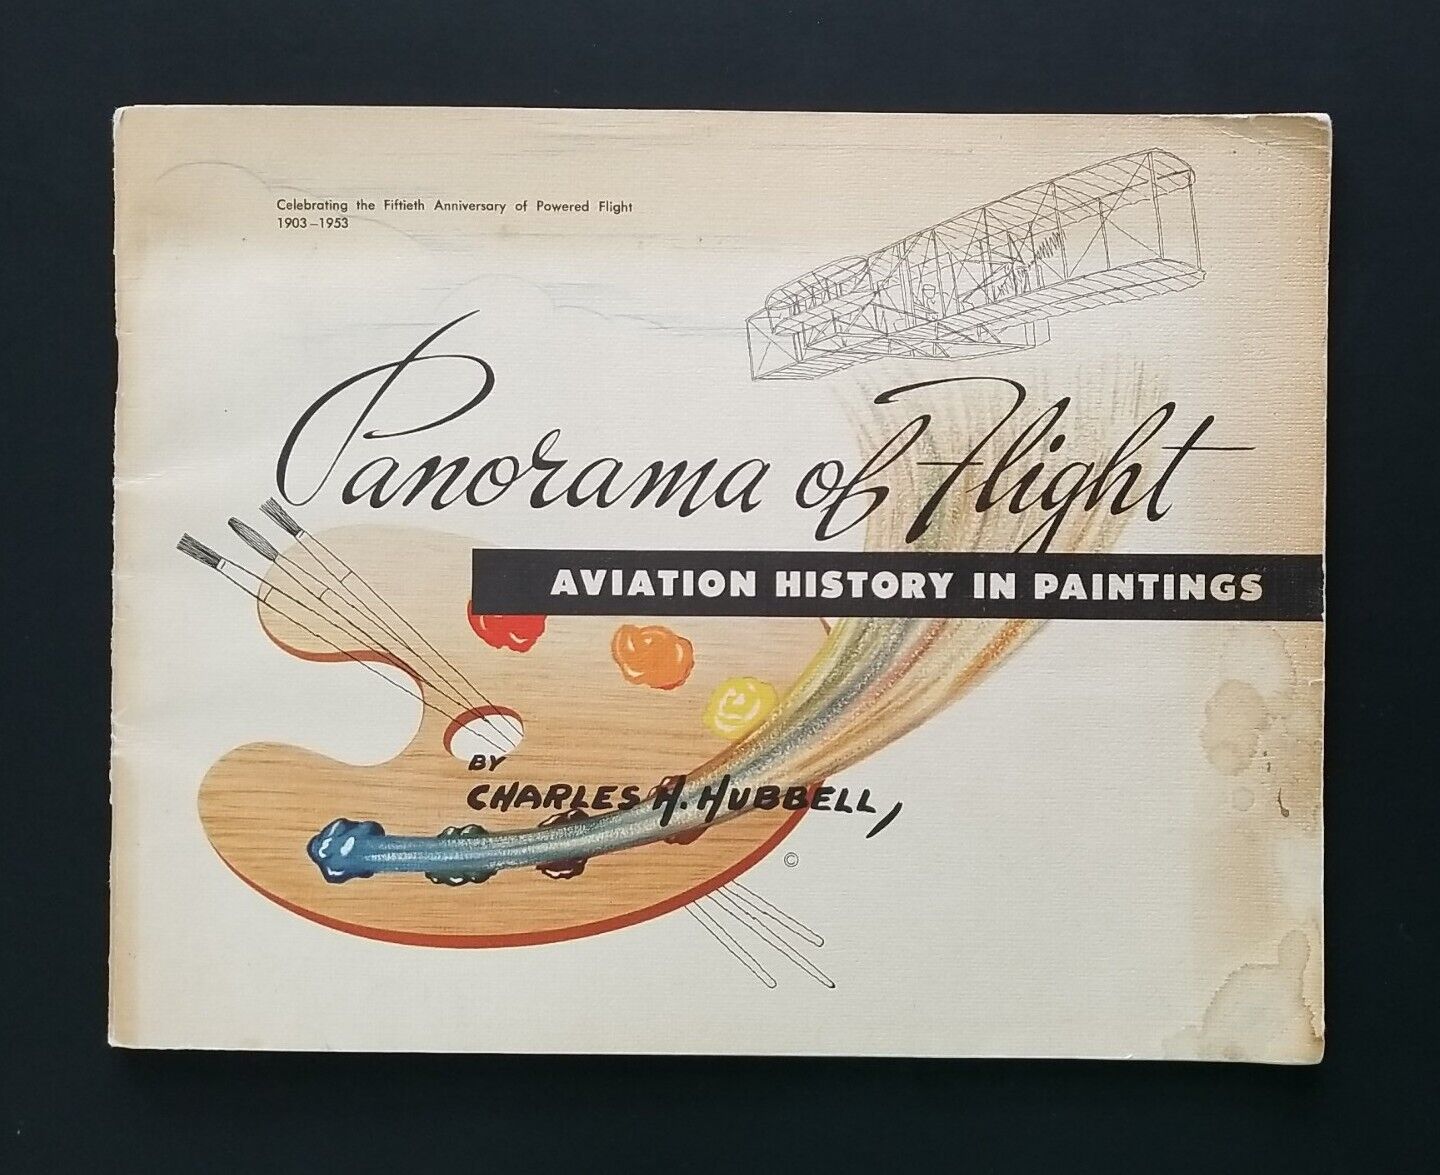 1953 PANORAMA OF FLIGHT: AVIATION HISTORY IN PAINTINGS Booklet By C. H. Hubbell